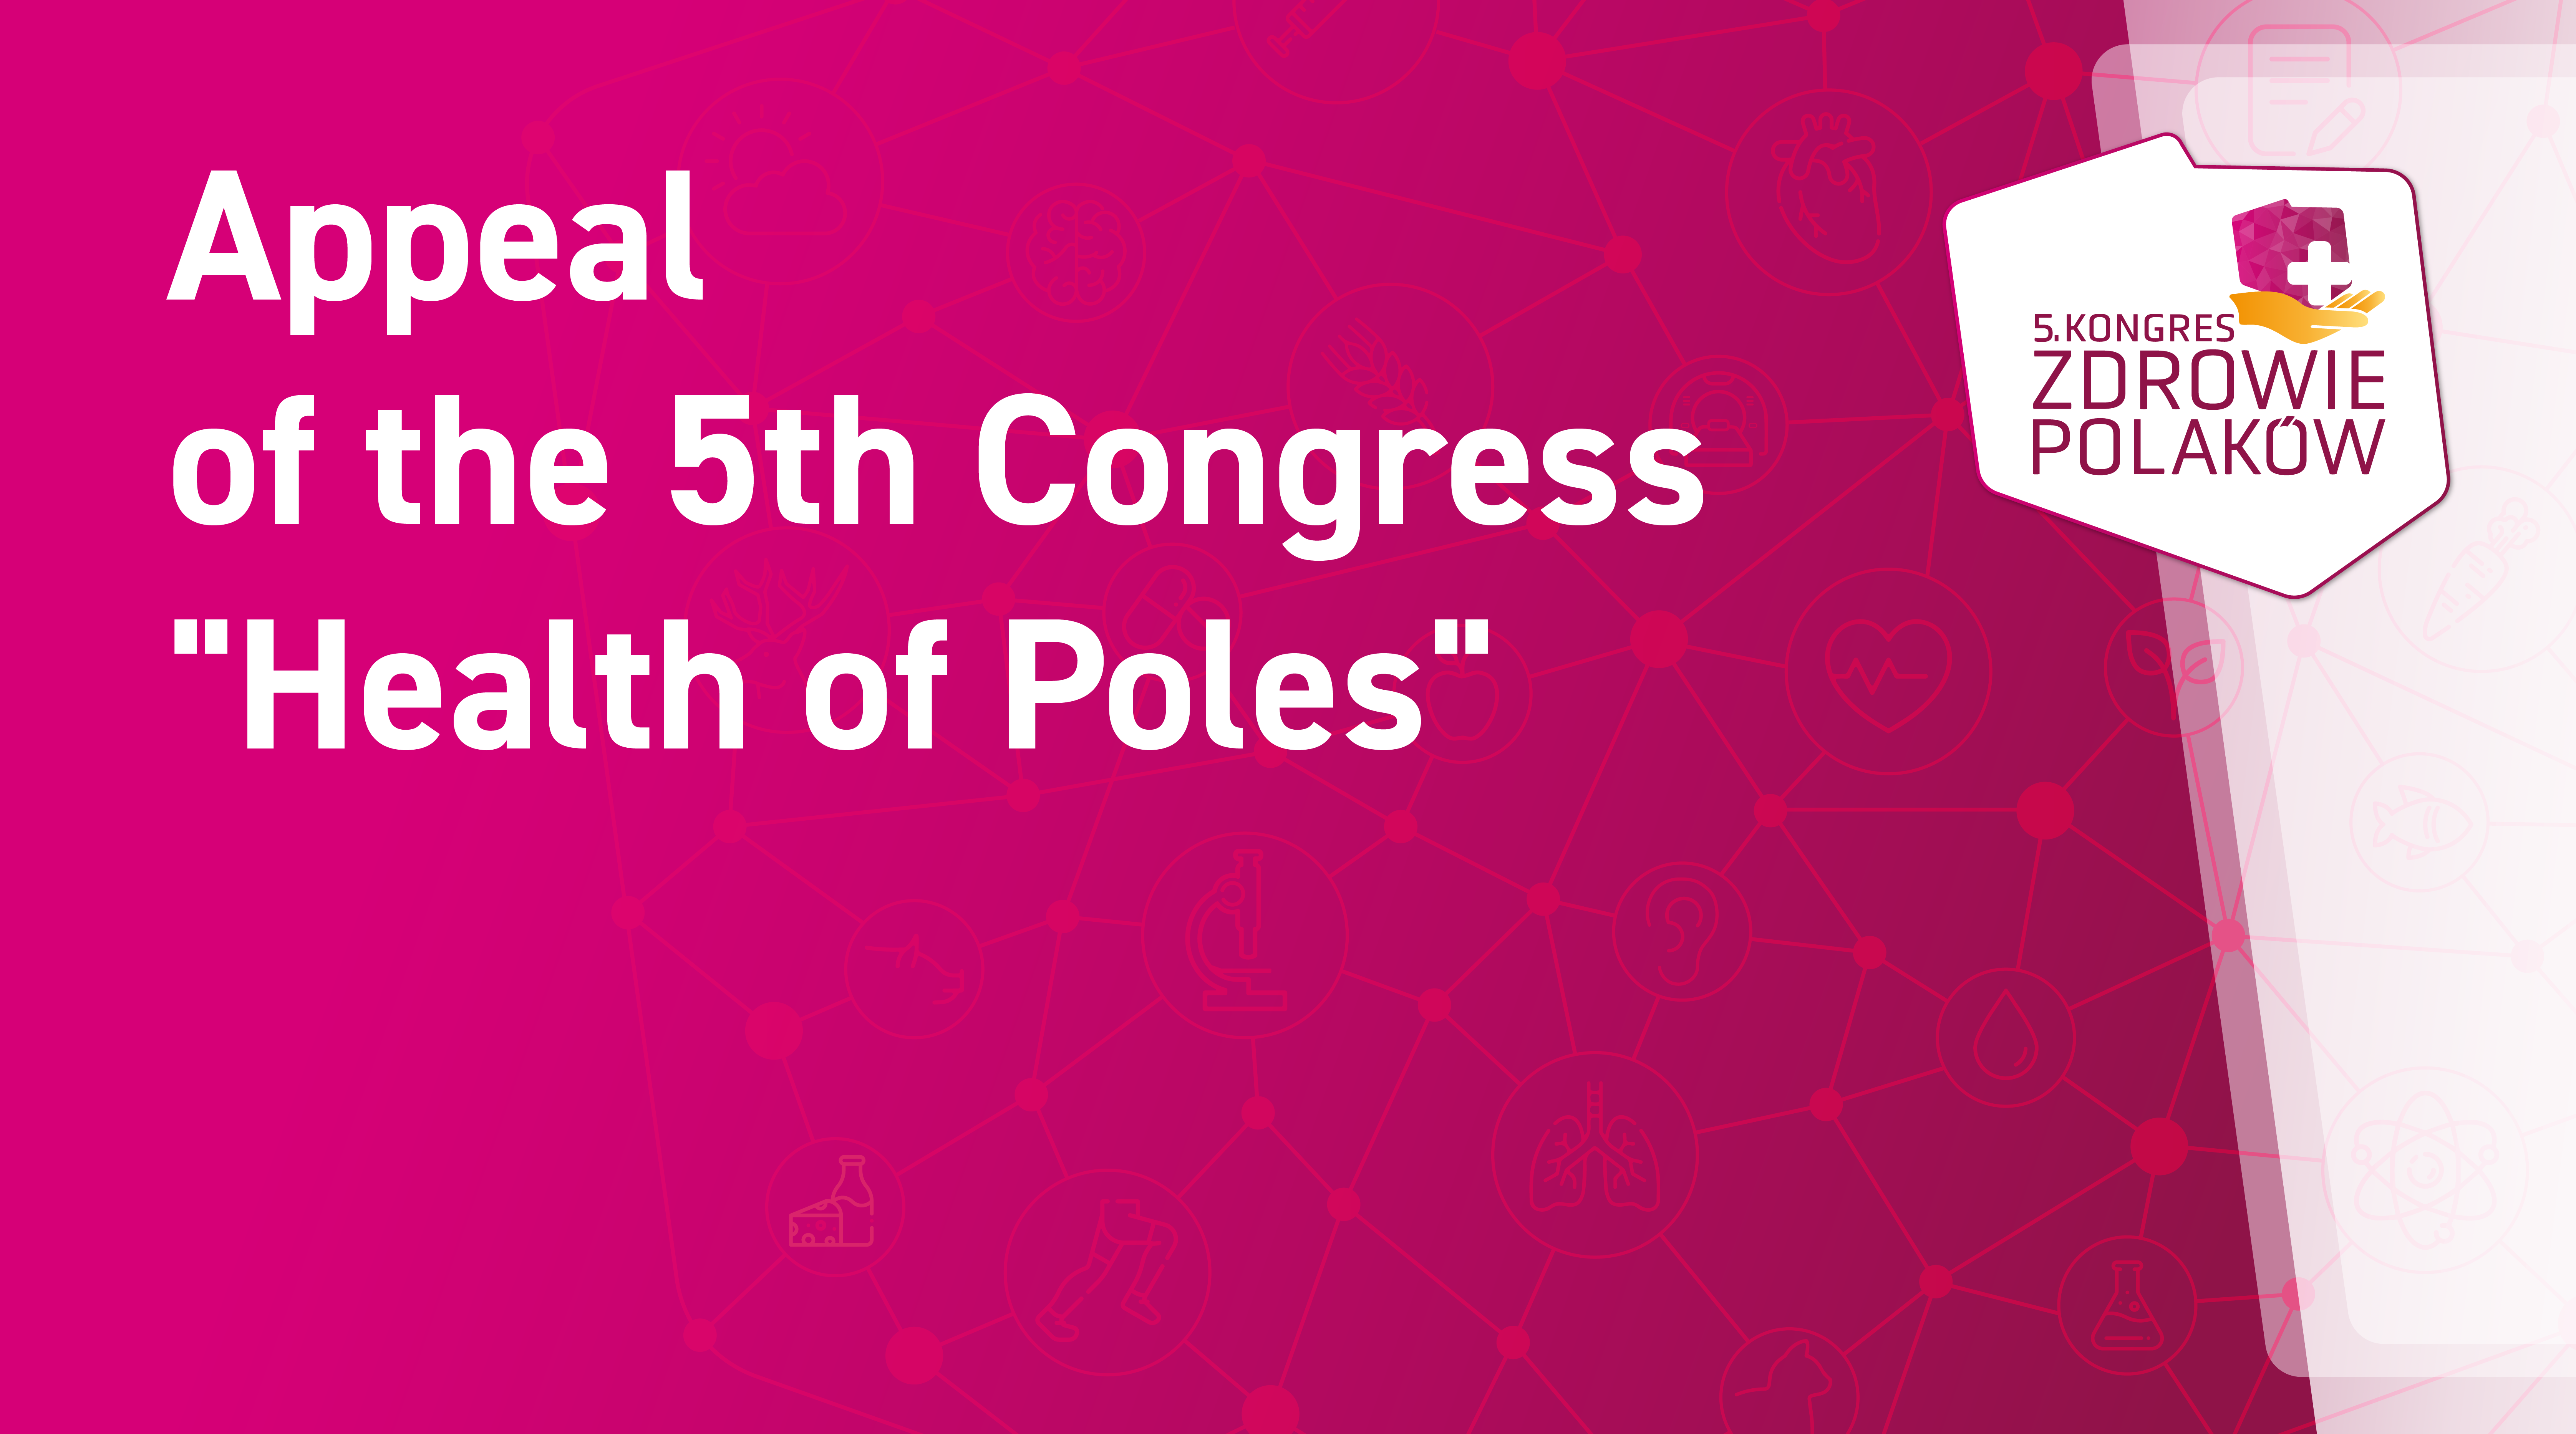 Appeal of the 5th Congress “Health of Poles”